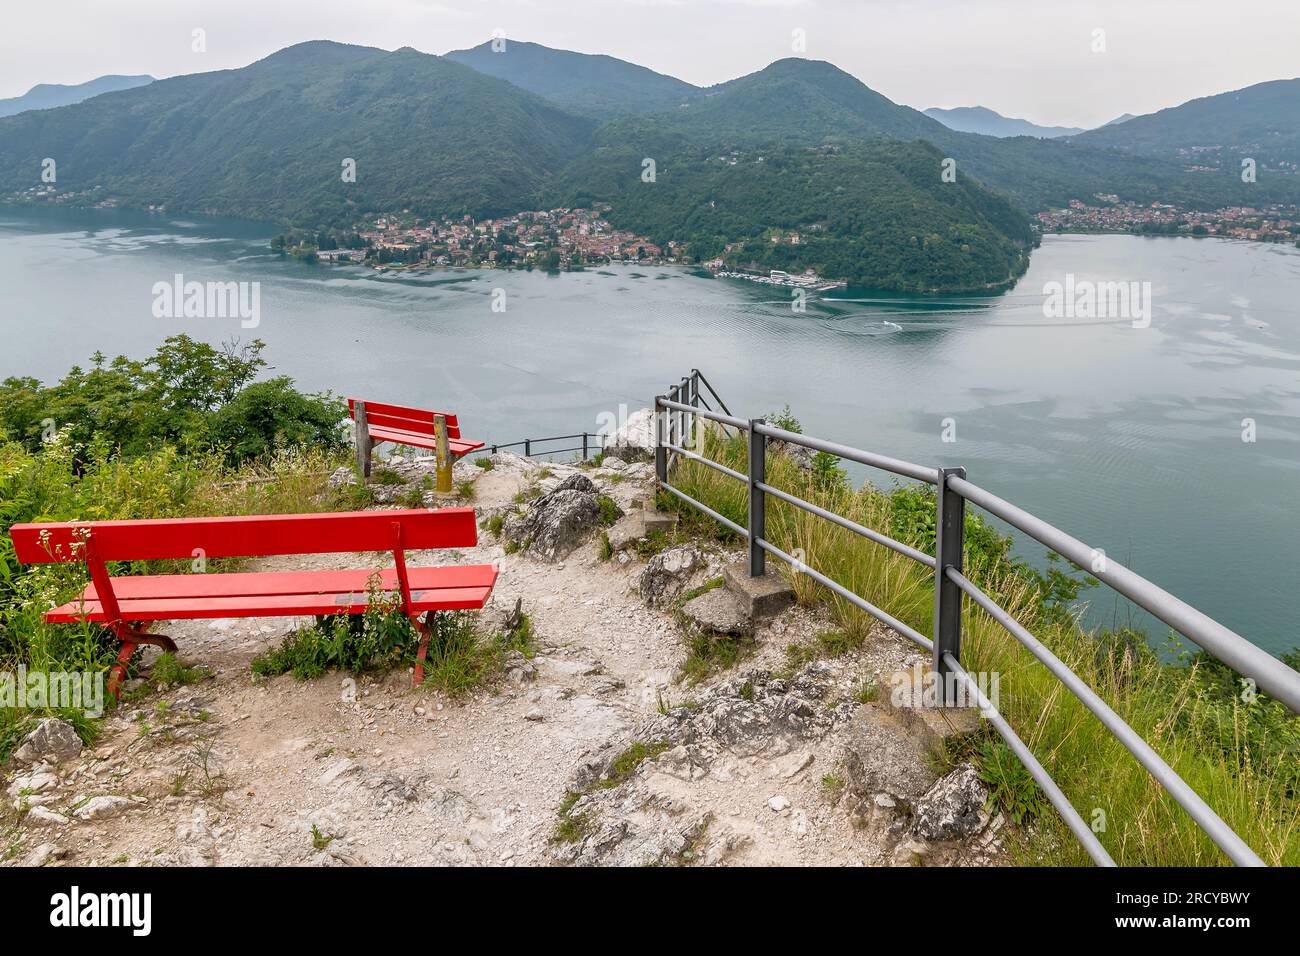 Two red wooden benches in the Sasso delle Parole viewpoint, Lugano, Switzerland Stock Photo